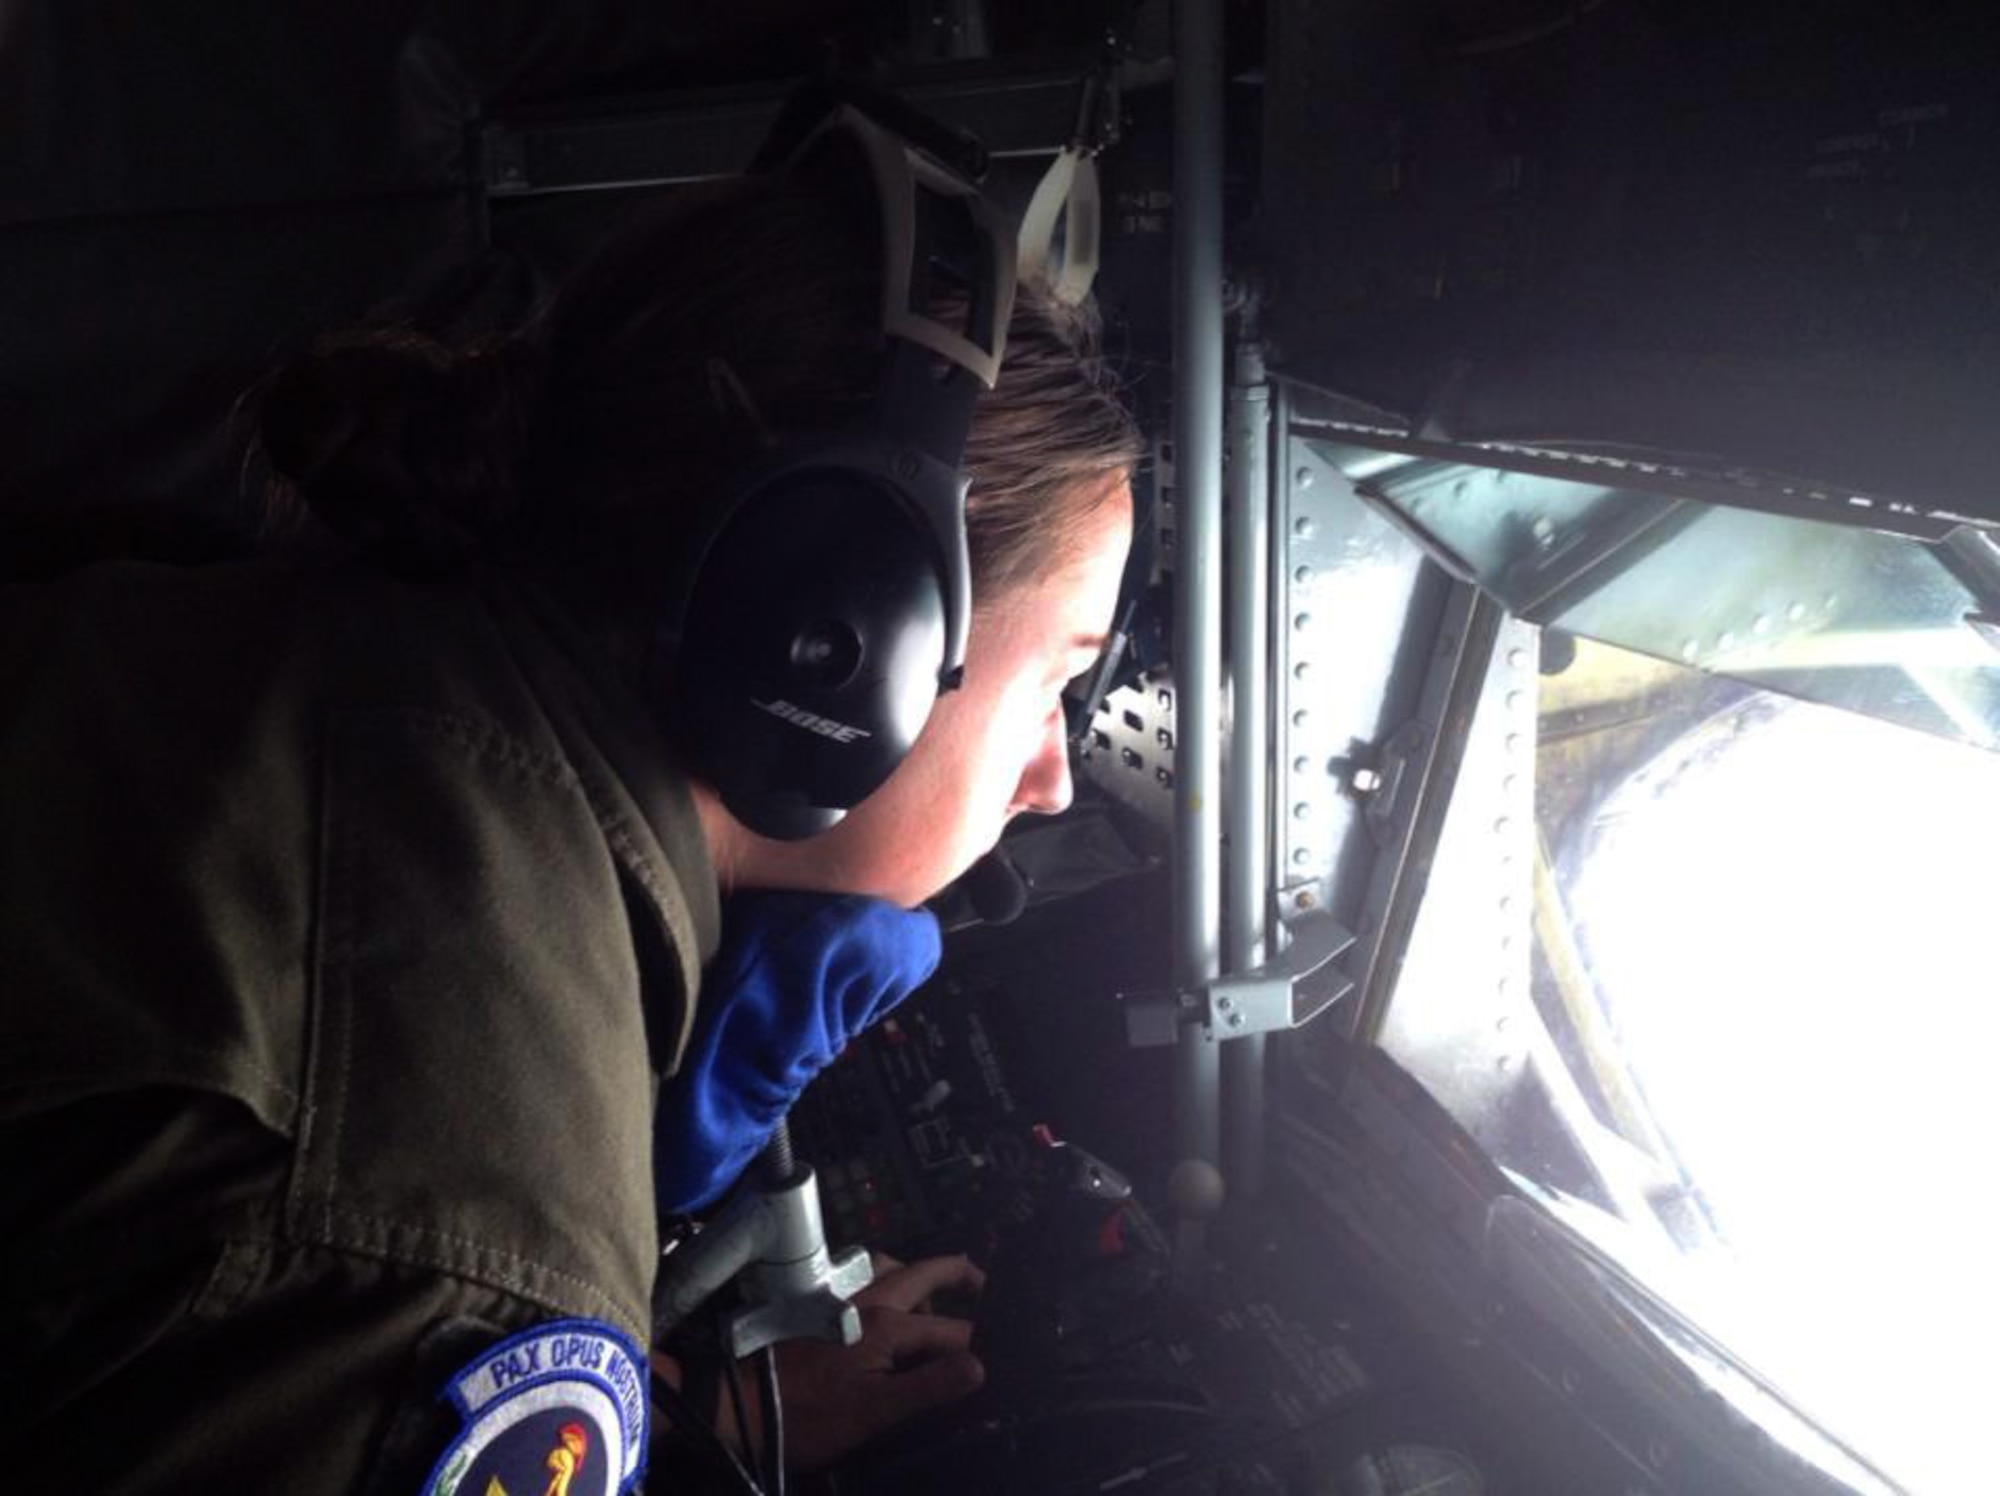 Senior Airman Danielle Repp performs aerial refueling in a KC-135 Stratotanker. Repp, assigned with the 351st Air Refueling Squadron, Spokane, Washington, followed the same career path as her father and became a boom operator in 2012. (Photo courtesy of Daniel Repp)